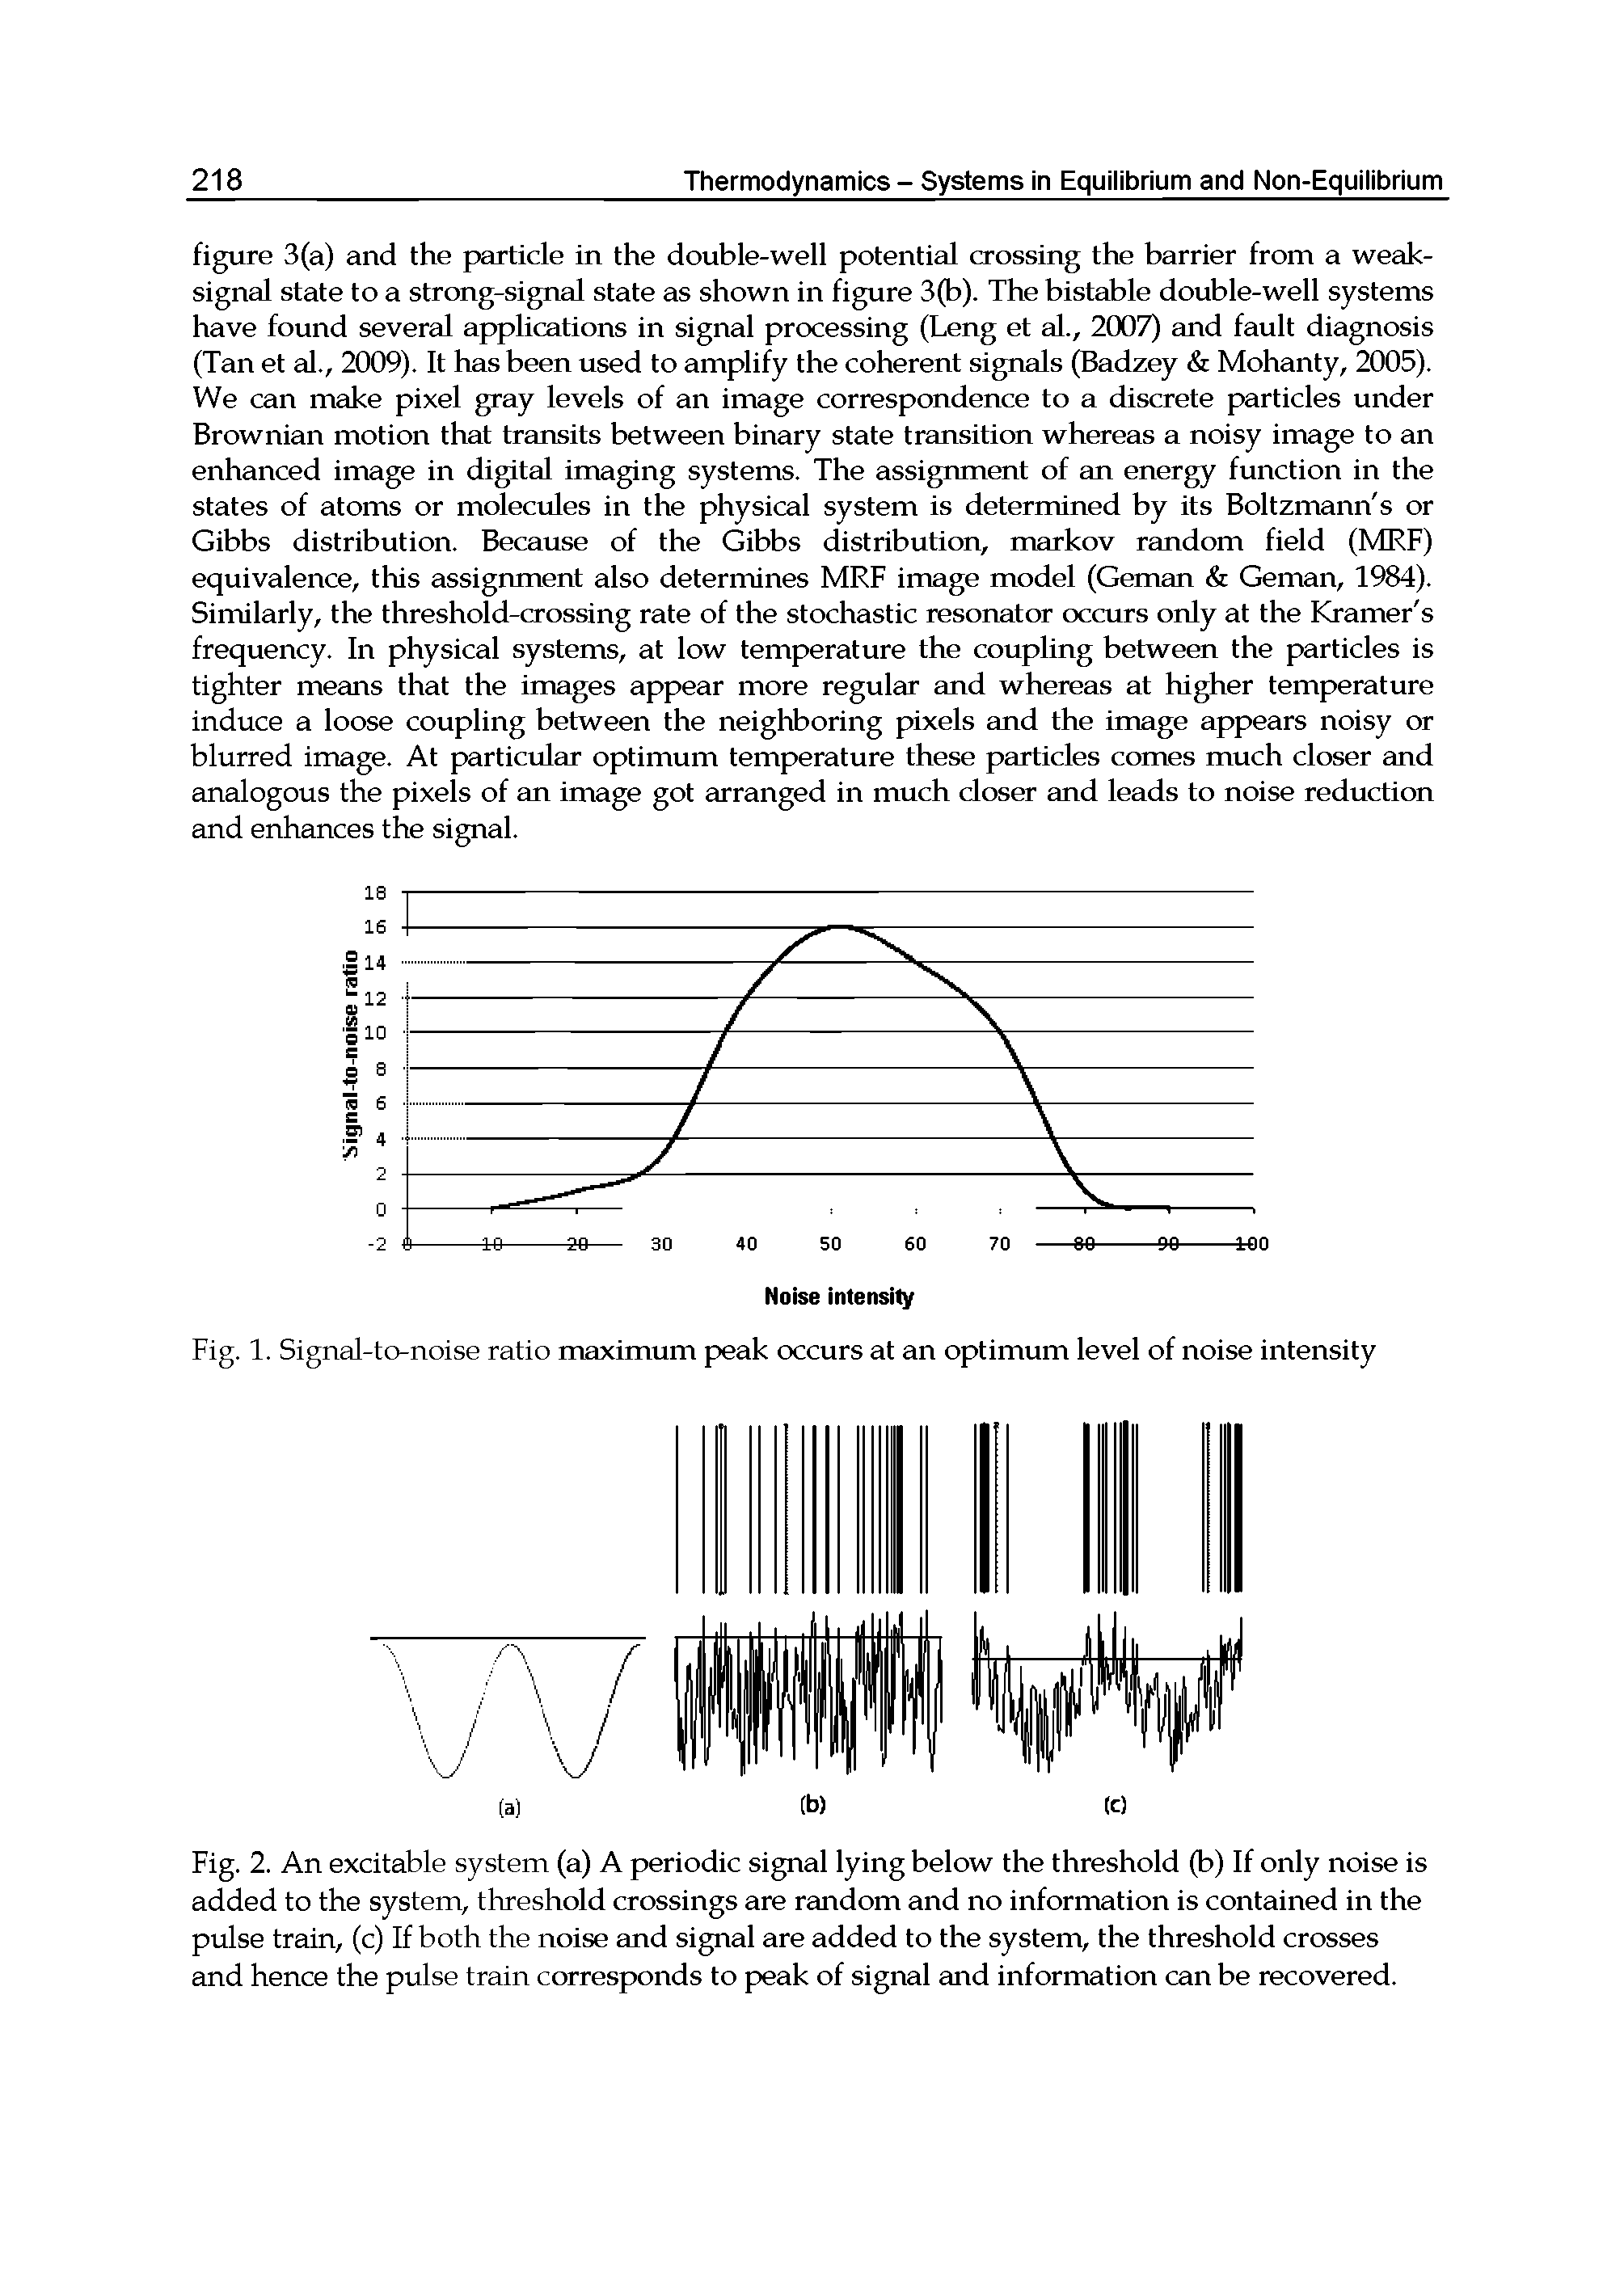 Fig. 2. An excitable system (a) A periodic signal lying below the threshold (b) If only noise is added to the system, threshold crossings are random and no information is contained in the pulse train, (c) If both the noise and signal are added to the system, the threshold crosses and hence the pulse train corresponds to peak of signal and information can be recovered.